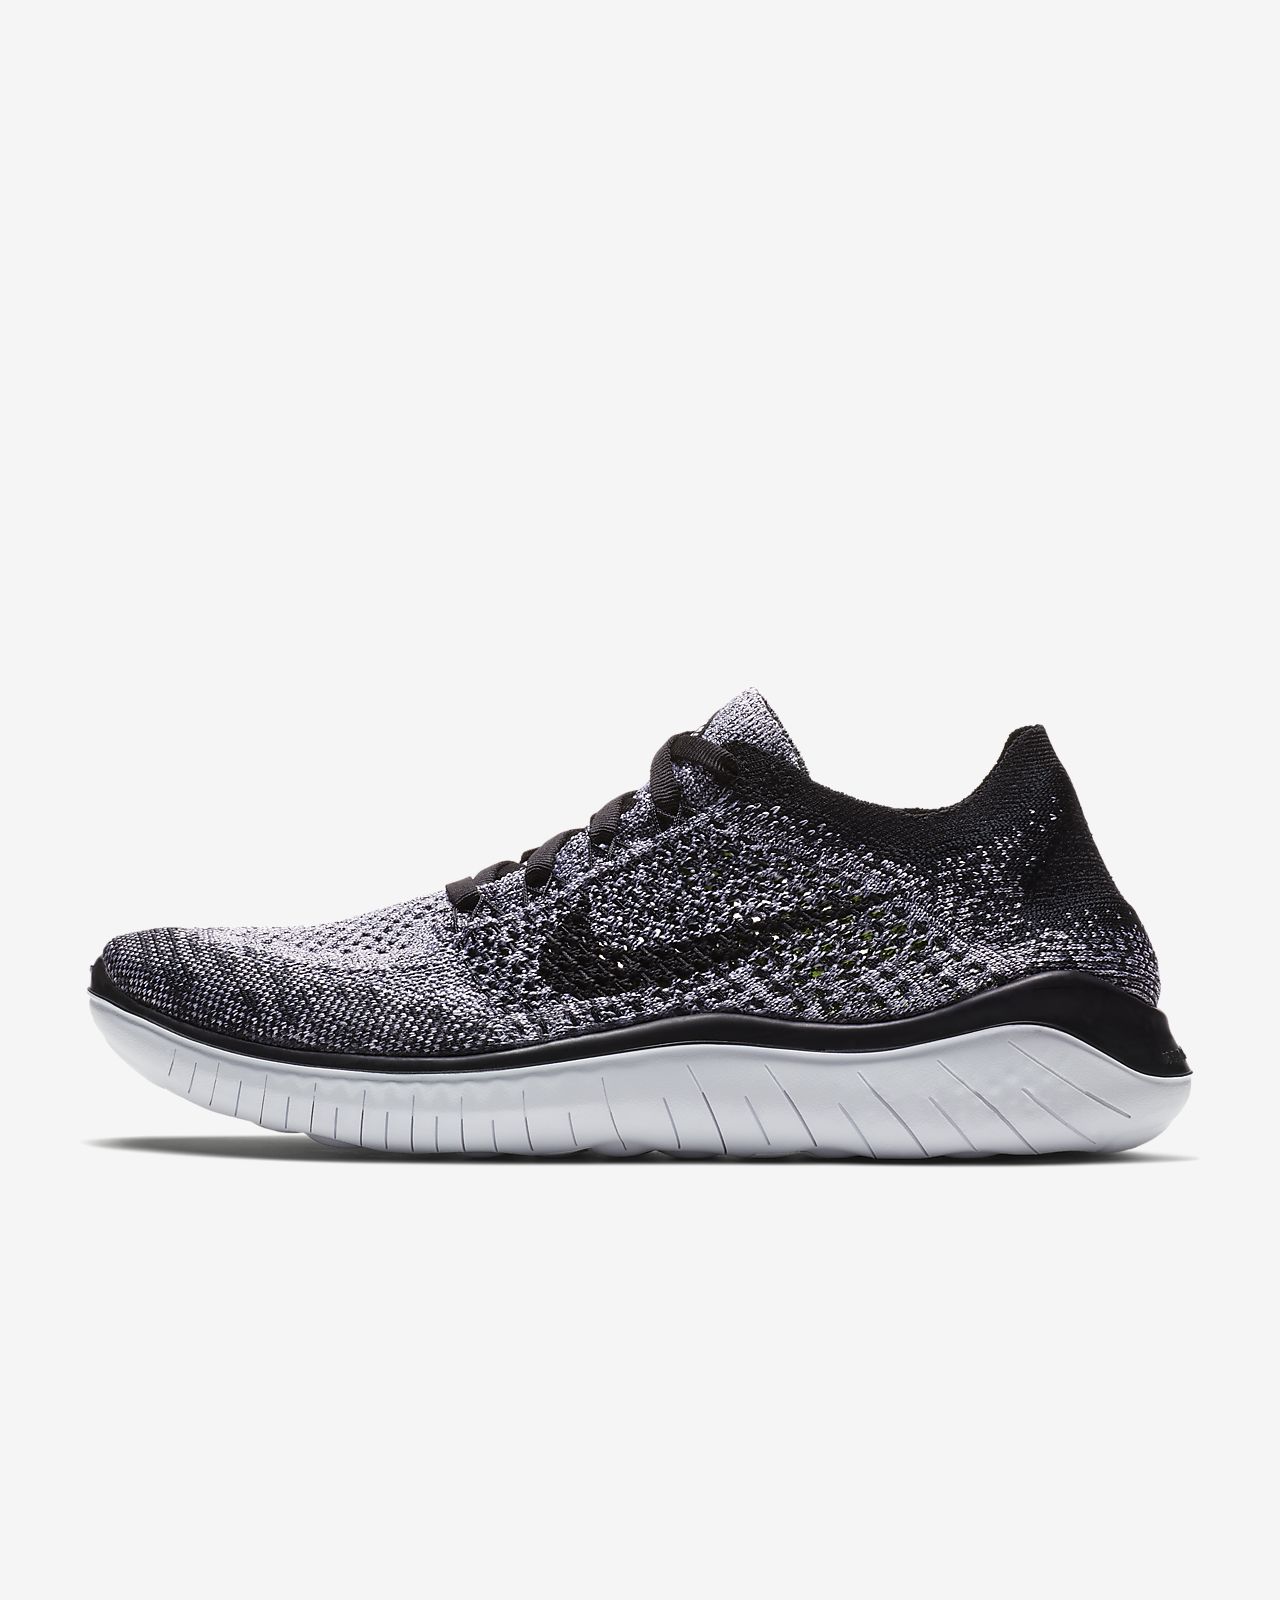 shoes similar to nike free rn flyknit